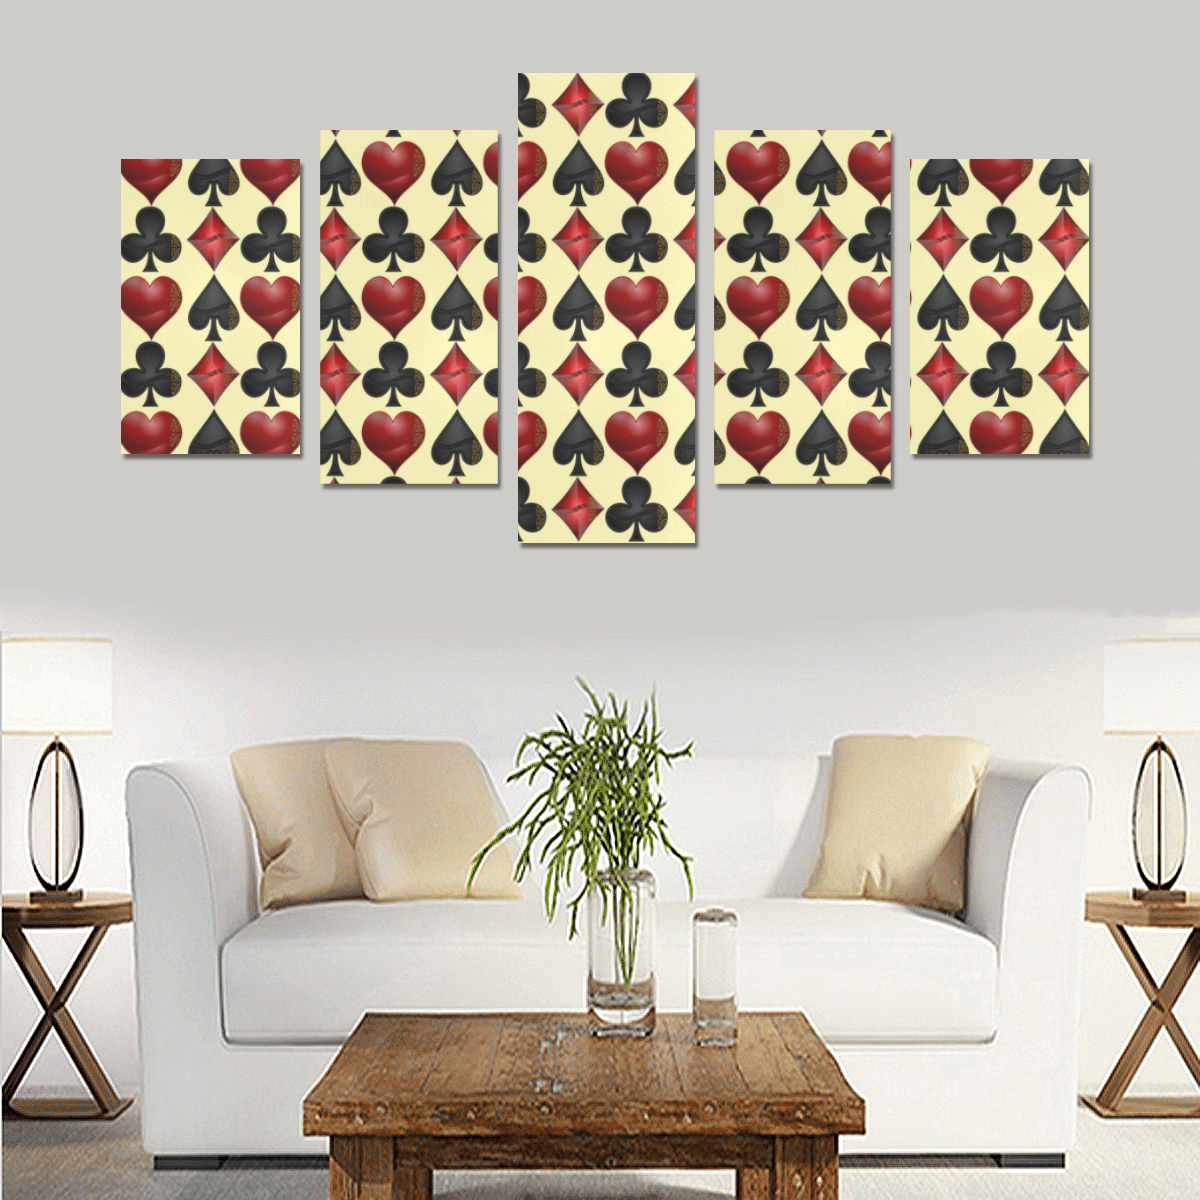 Las Vegas Black and Red Casino Poker Card Shapes on Yellow Canvas Print Sets C (No Frame)